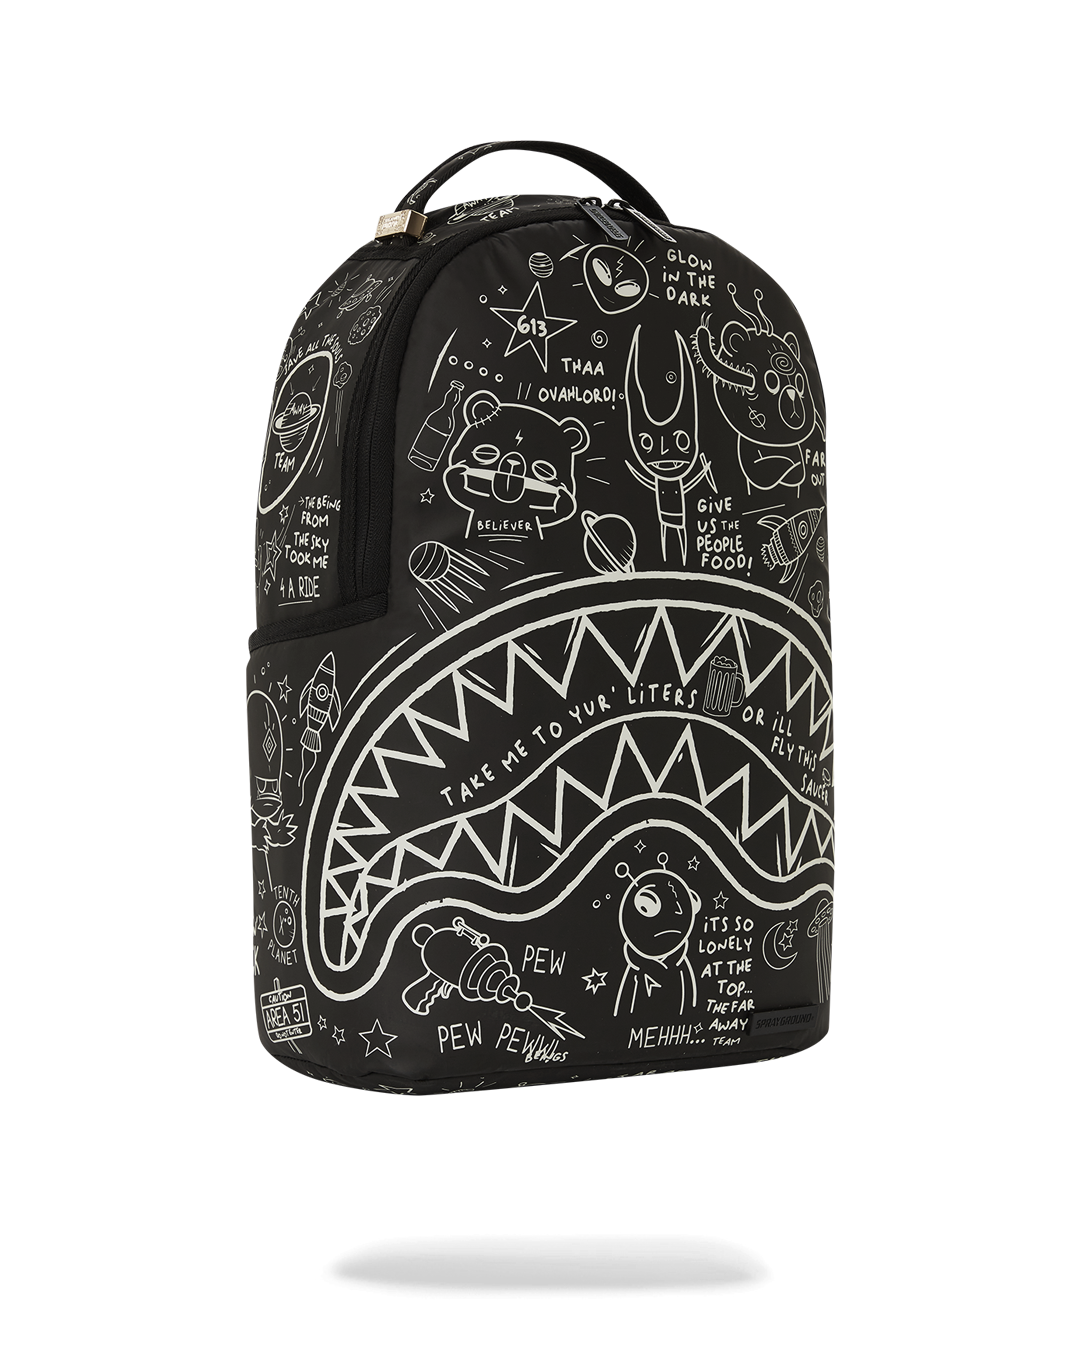 GLOW THE SPACE BACKPACK (GLOW IN THE DARK EFFECT) – SPRAYGROUND®